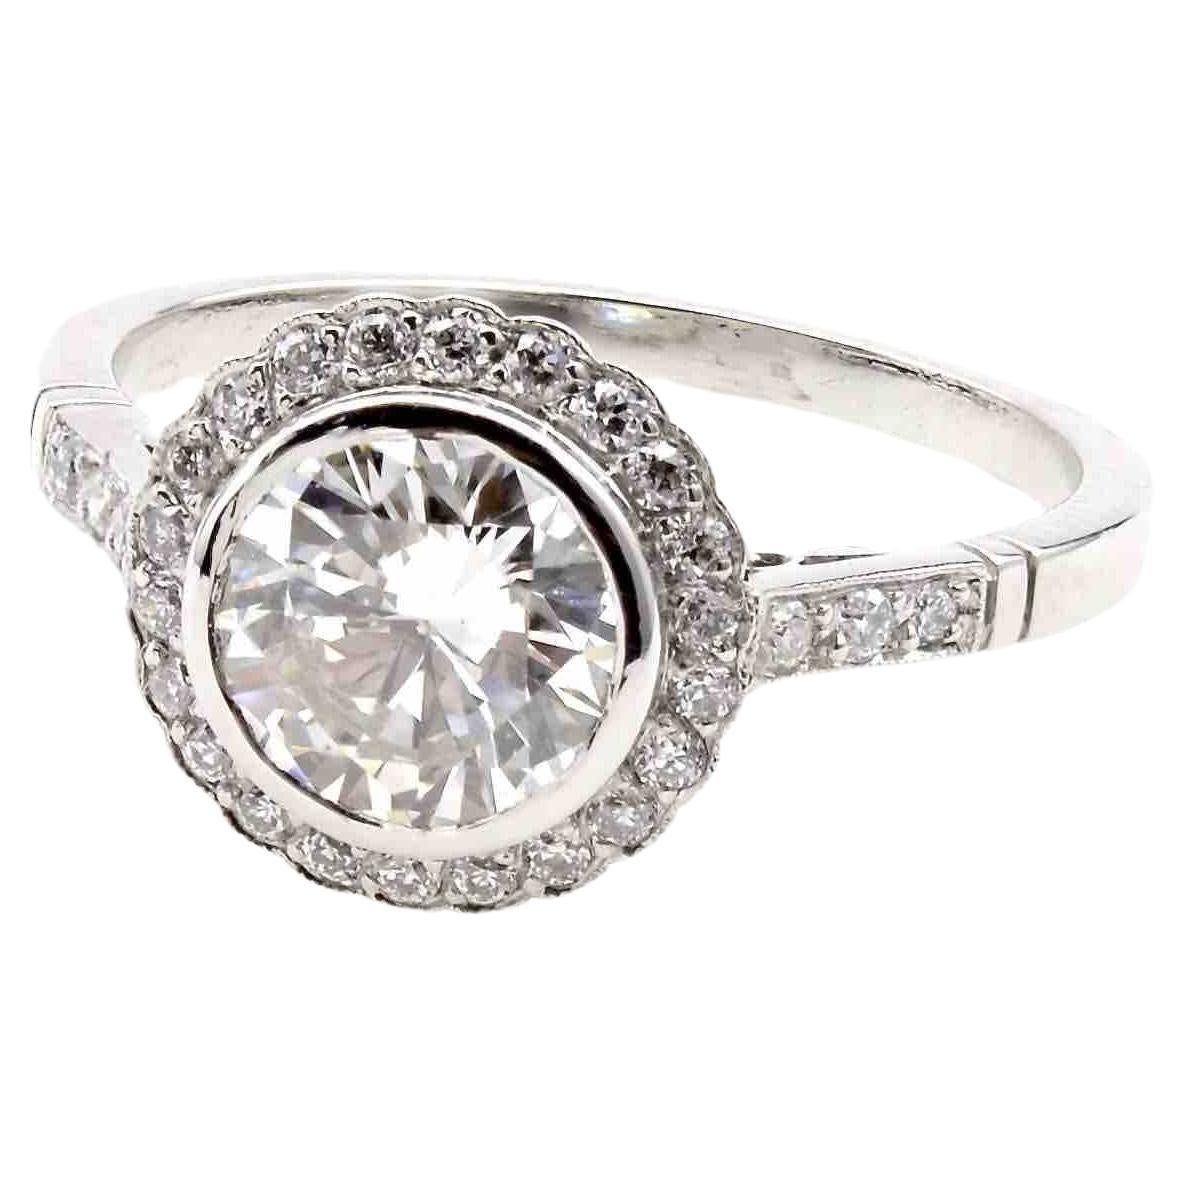 1, 57 carats I/Si1 diamond ring in platinum For Sale